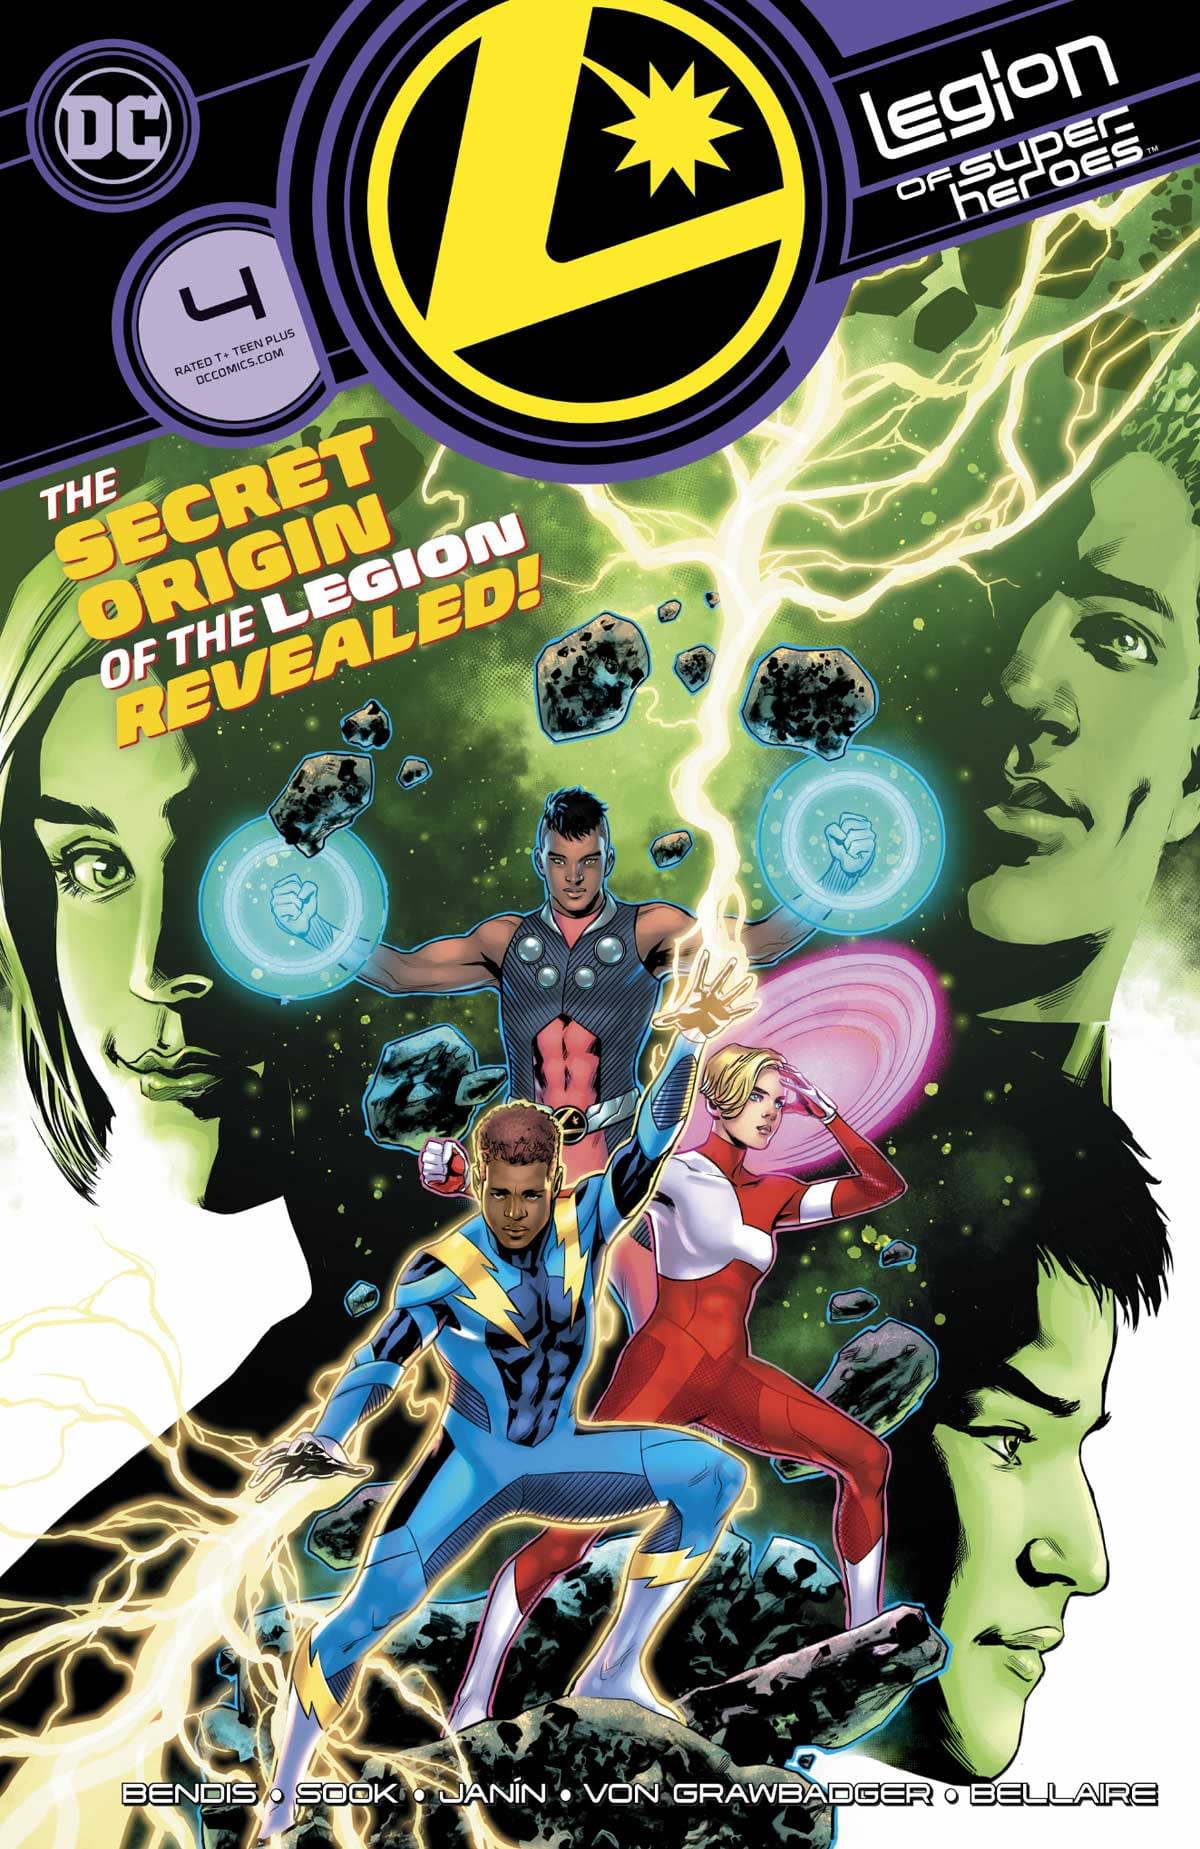 REVIEW: Legion Of Super-Heroes #4 -- "The Real First Issue Of The Latest Futuristic Reboot"